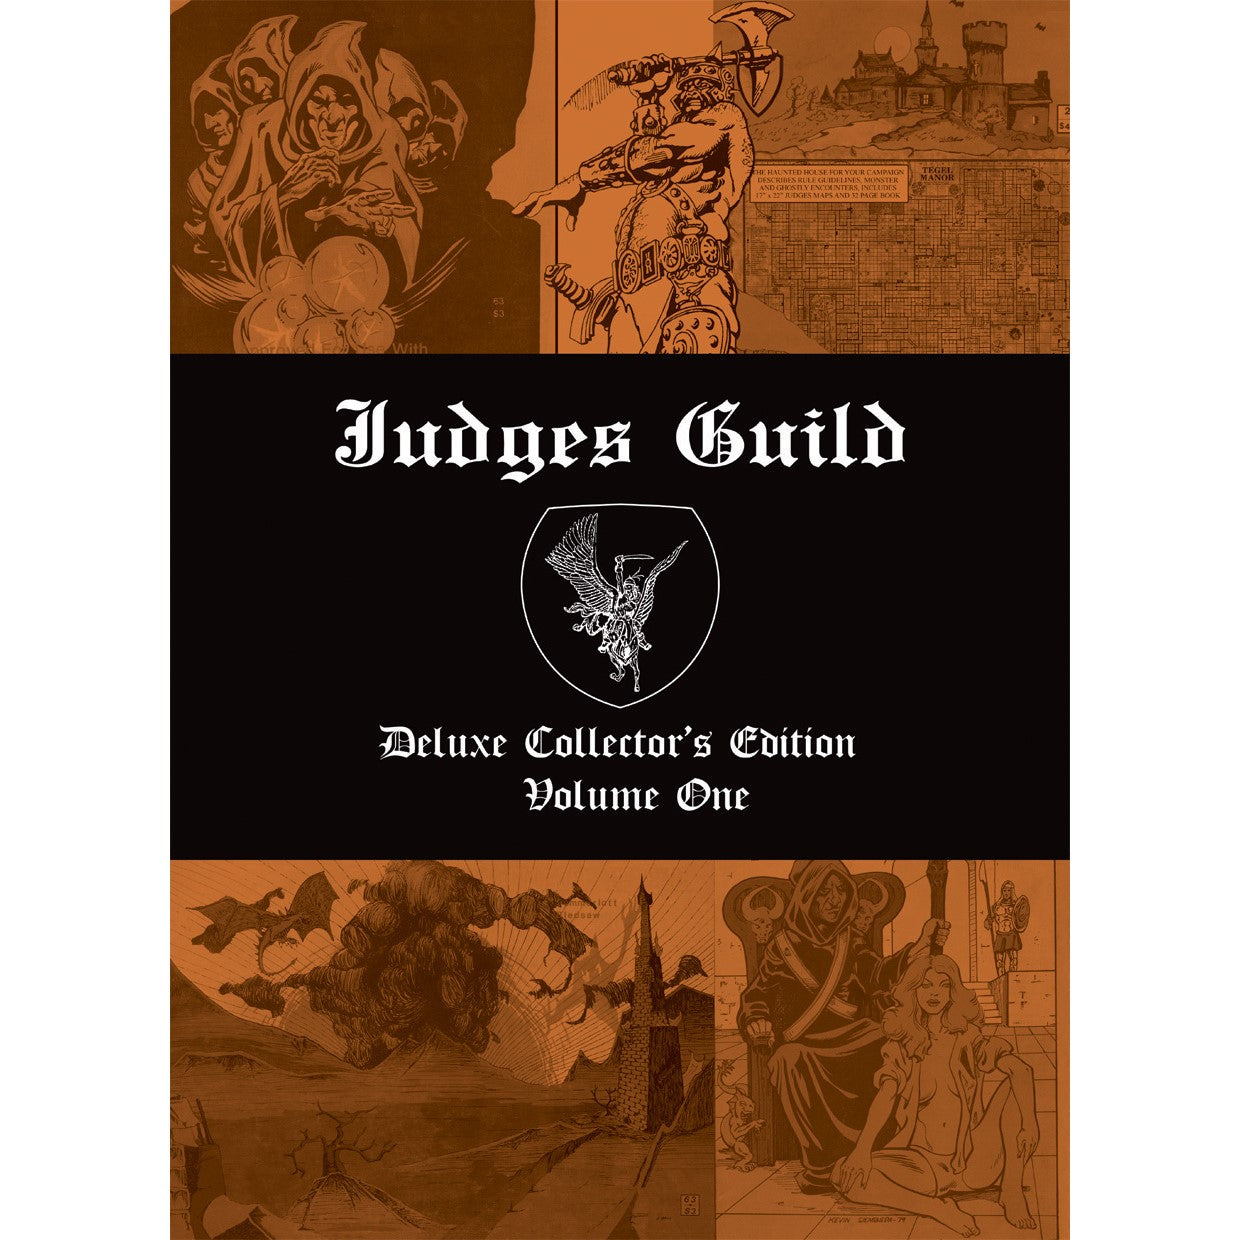 Judges Guild - Deluxe Oversized Collector’s Ed